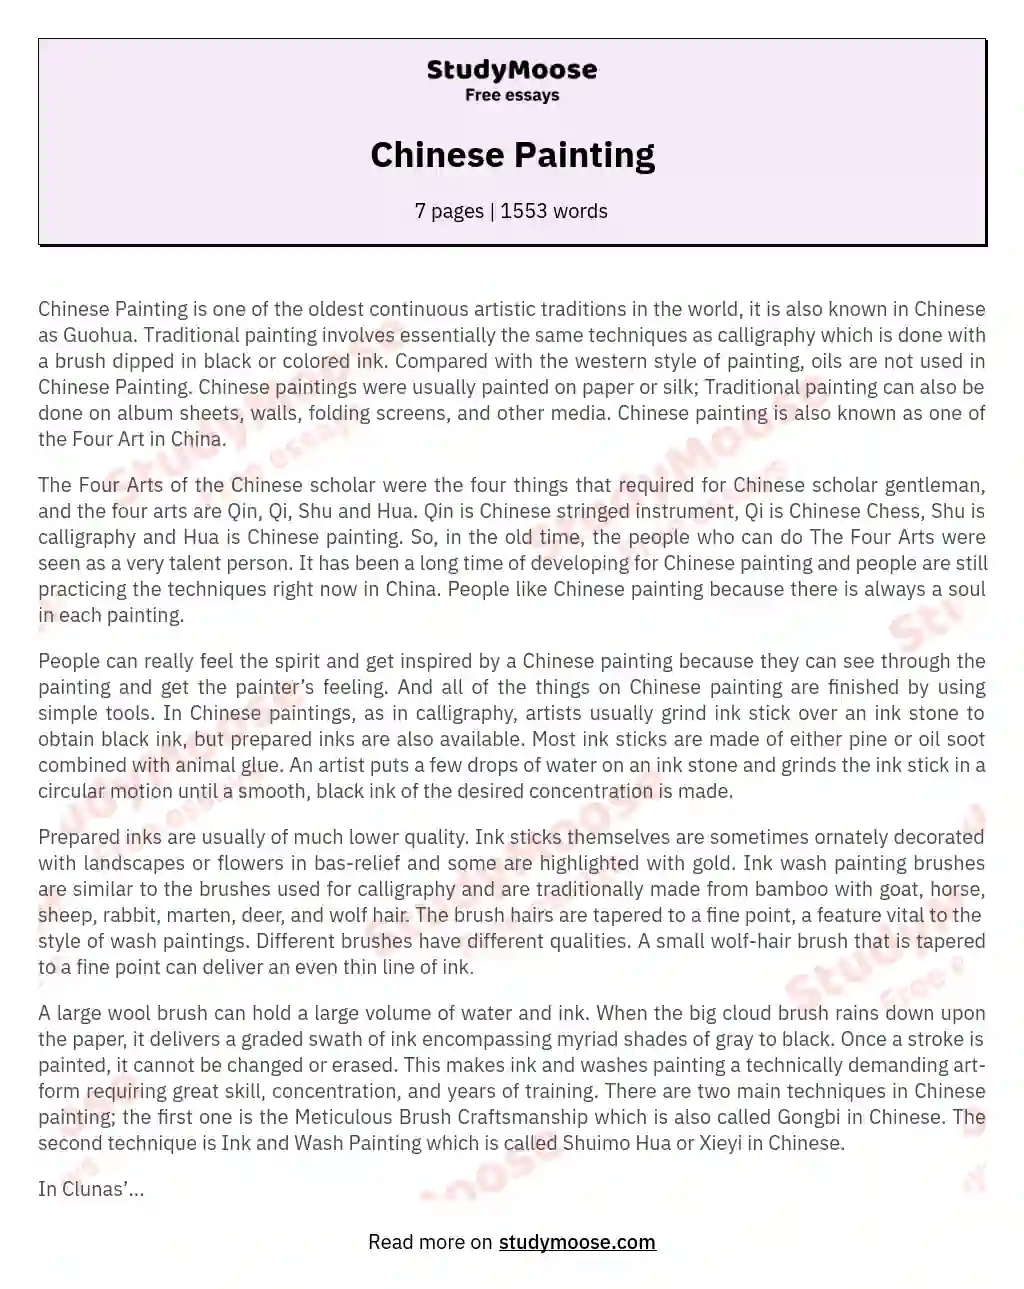 Chinese Painting essay